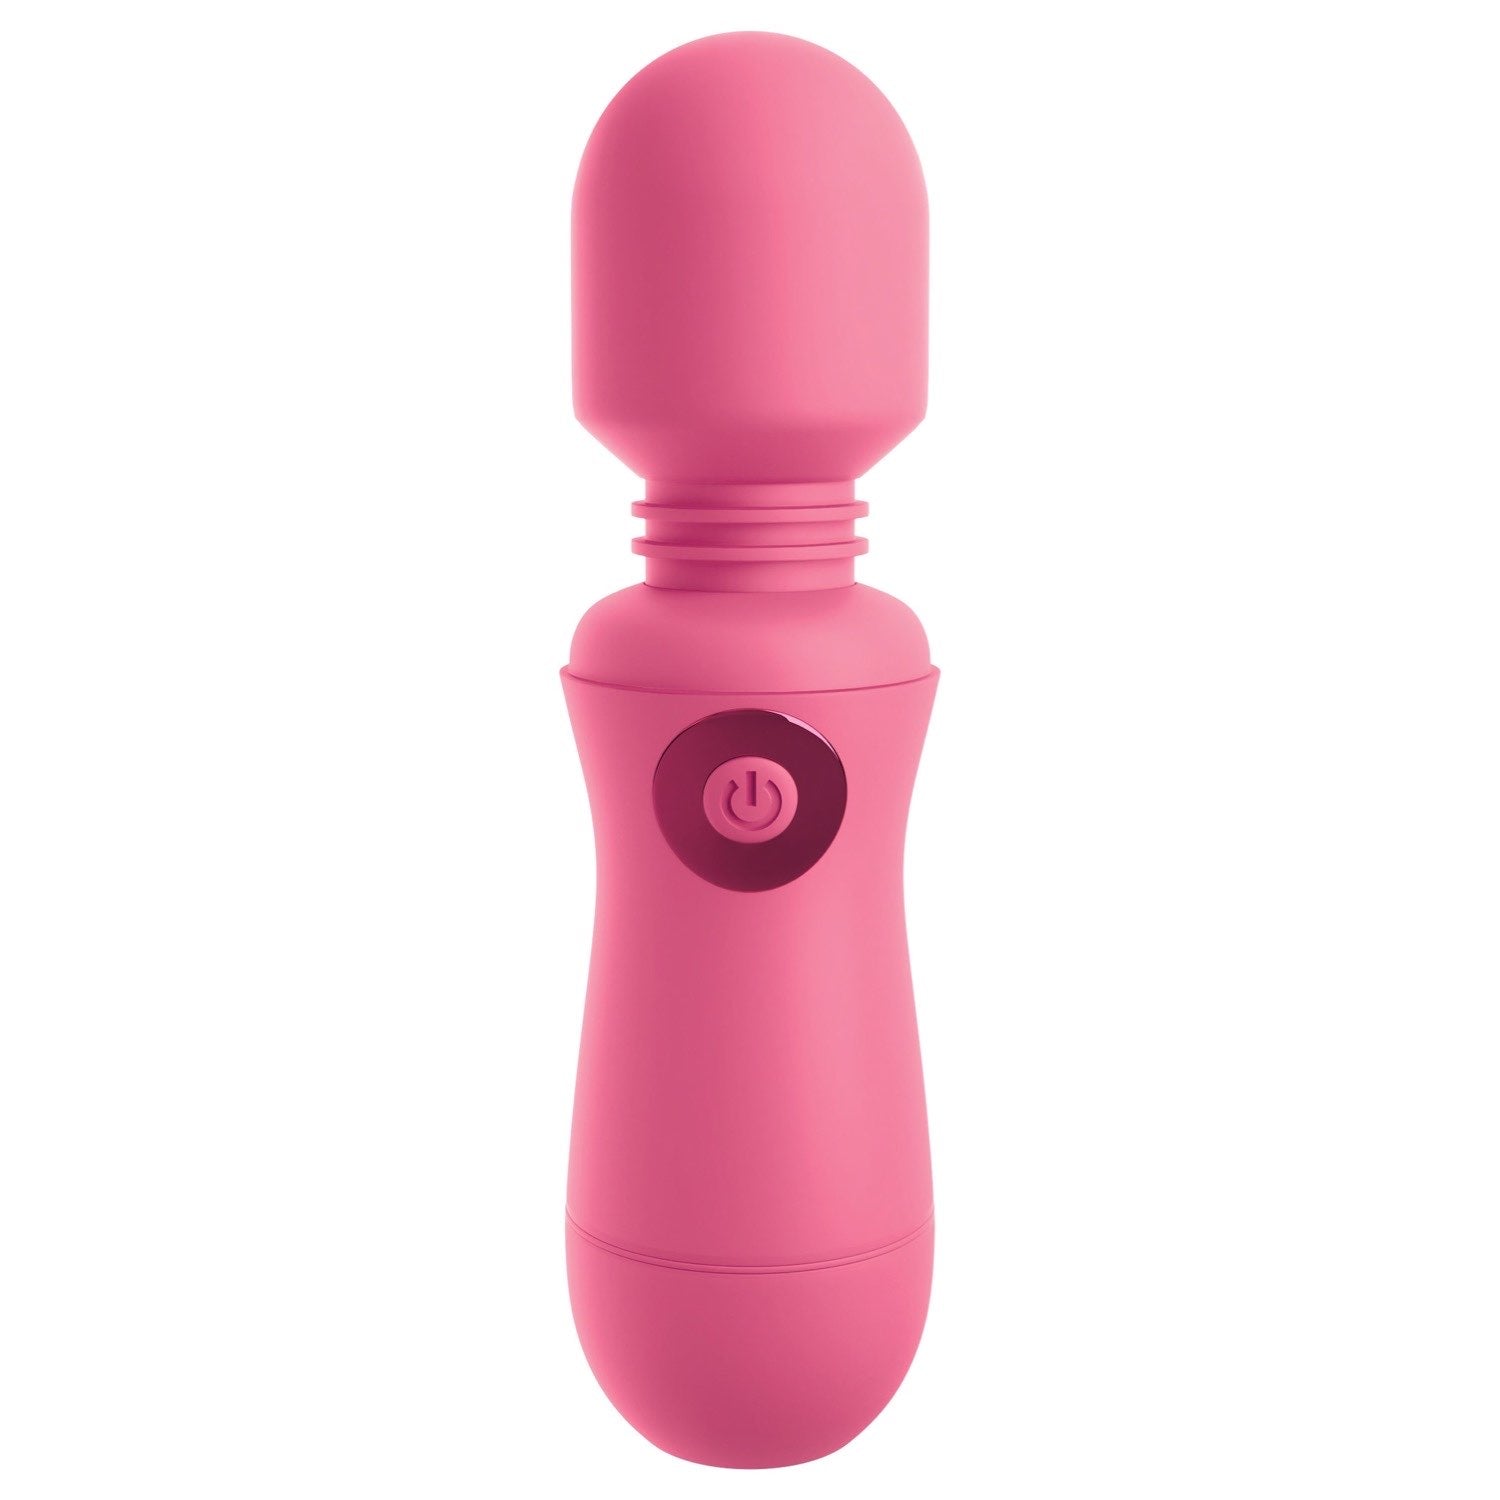 Omg! OMG! Wands #Enjoy - Pink USB Rechargeable Massager Wand by Pipedream